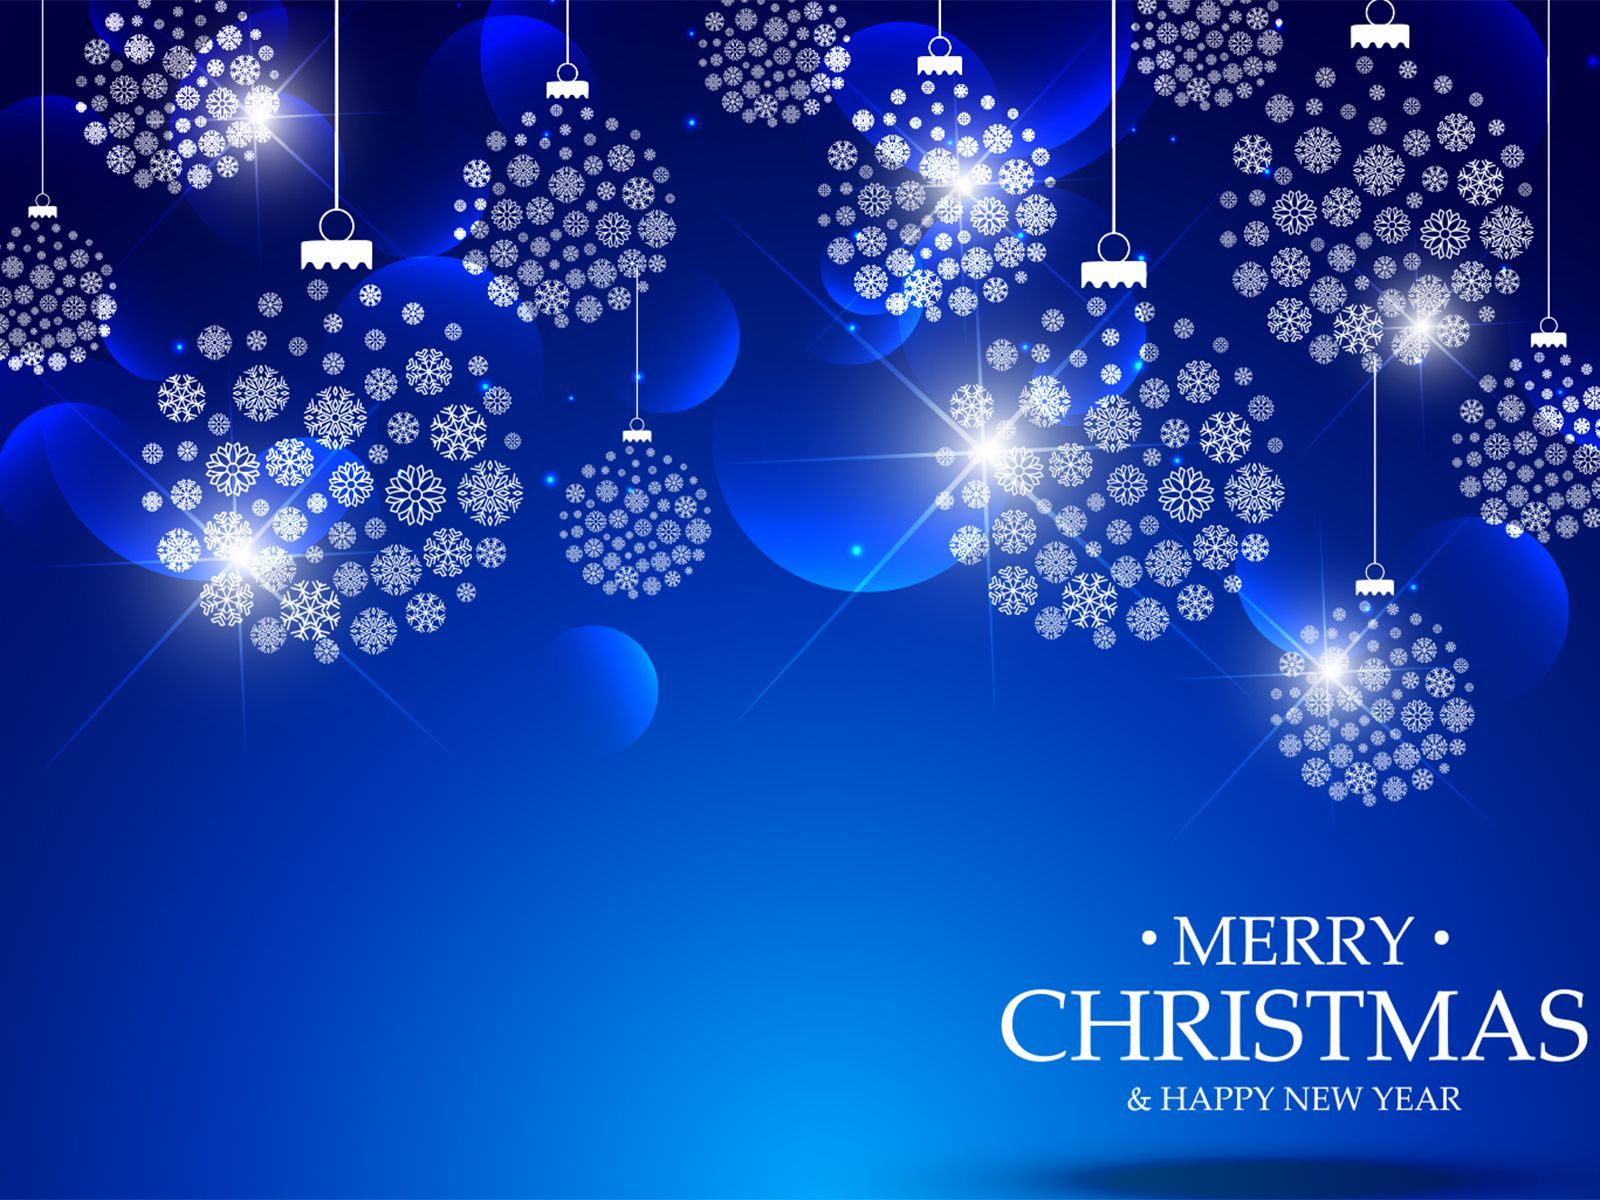 Blue Merry Christmas PPT Background. Christmas powerpoint , Holiday , Christmas wallpaper background